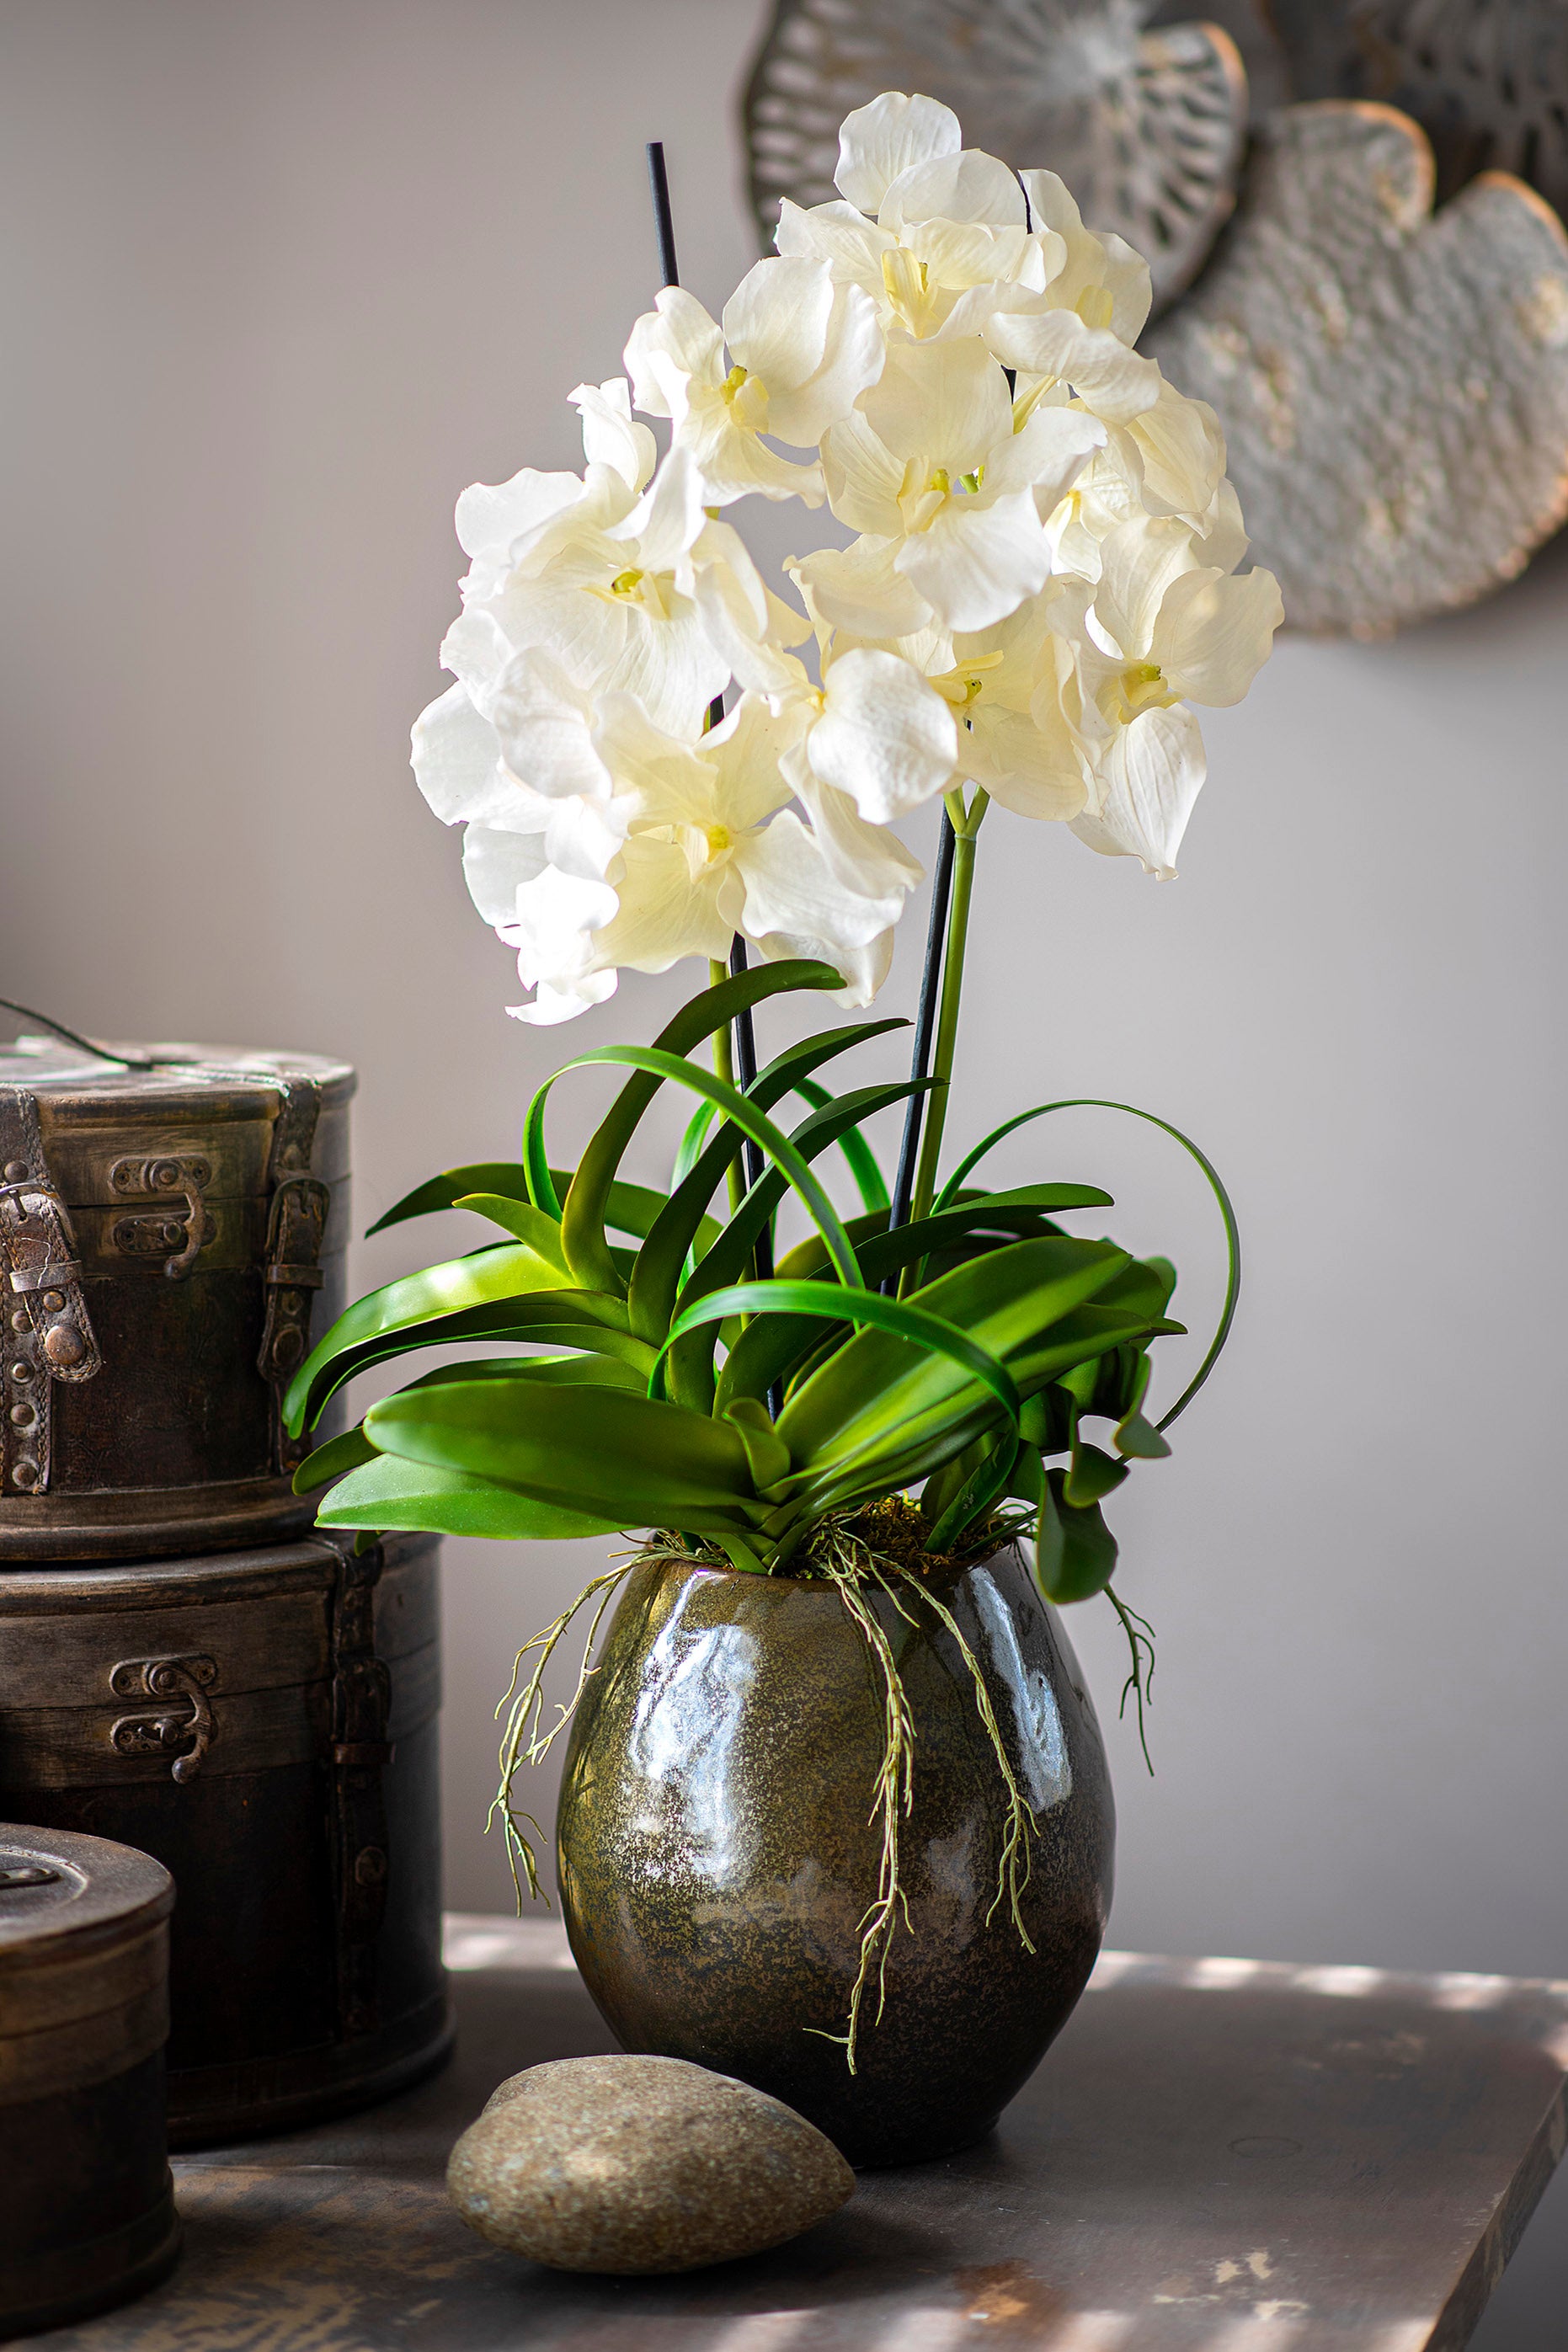 Vanda Orchids in a Olive Green Ceramic Pot – RTfact Flowers